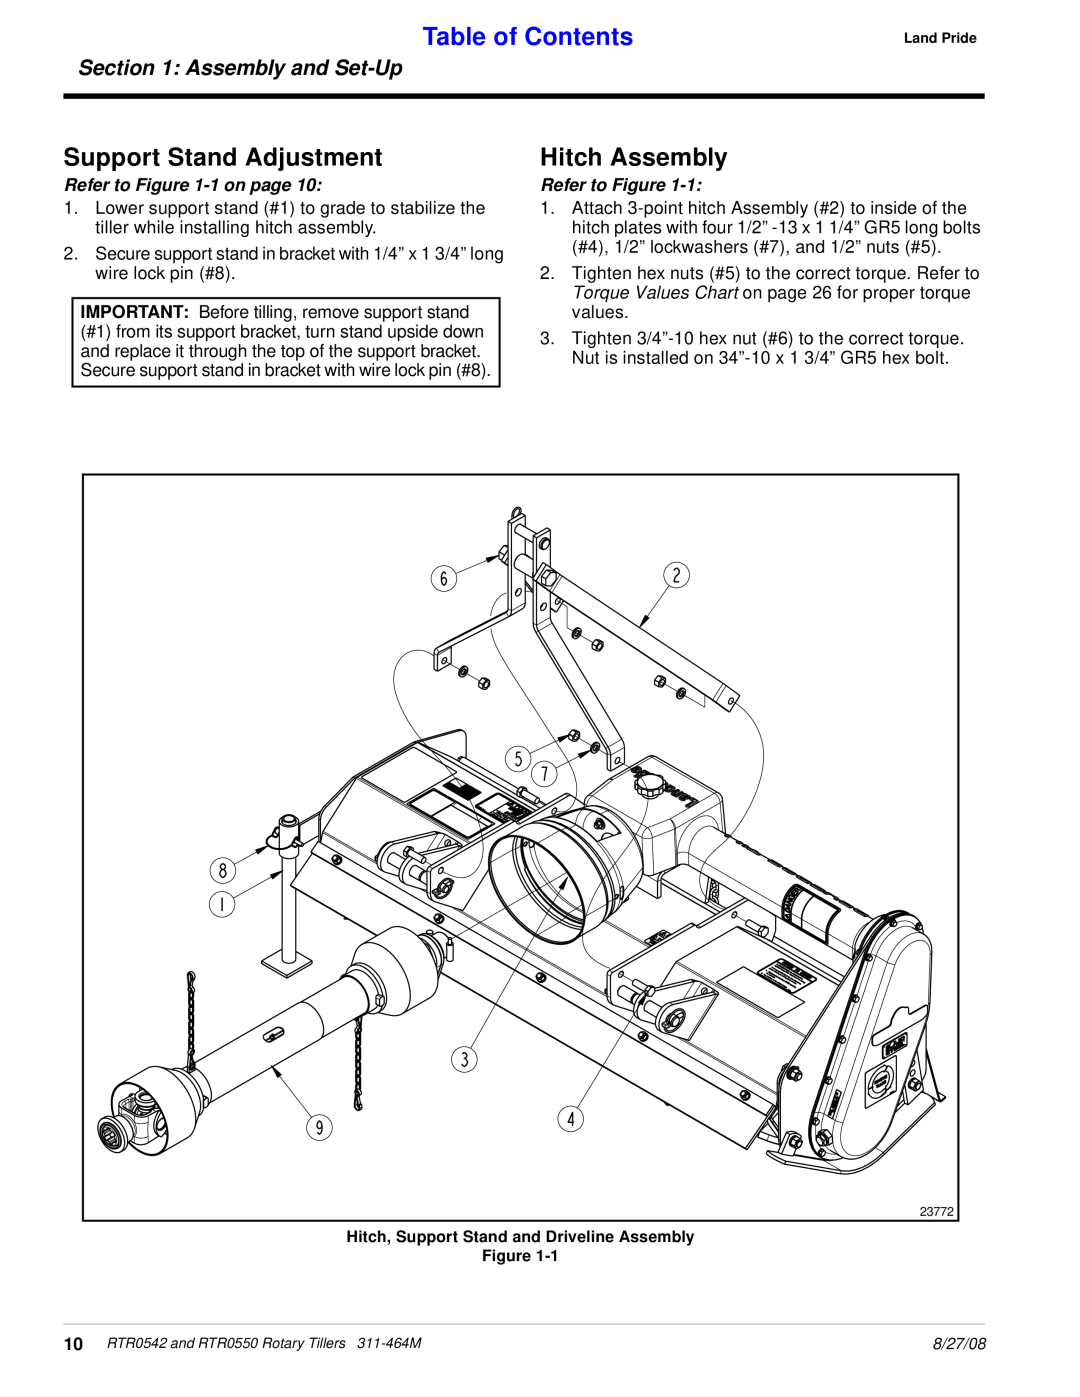 Land Pride RTR0542 Support Stand Adjustment, Hitch Assembly, Table of Contents, Assembly and Set-Up, Refer to -1 on page 